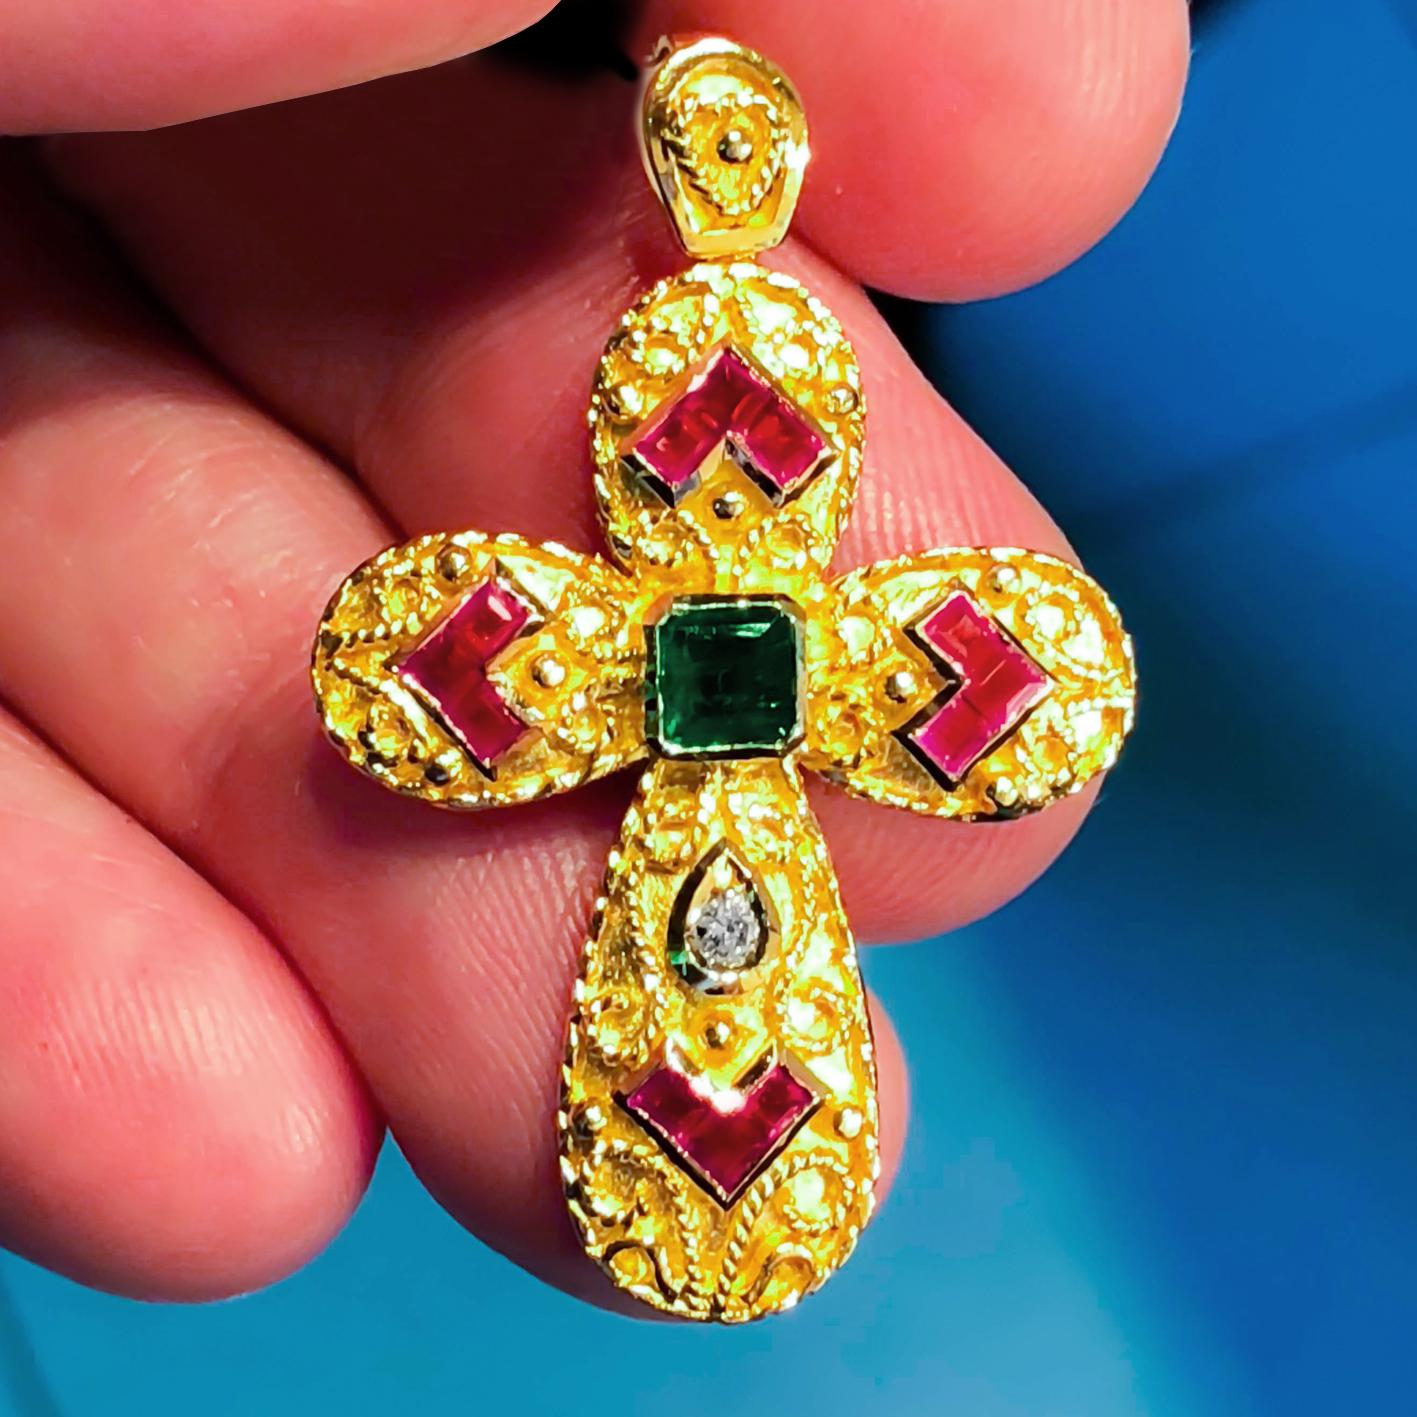 S.Georgios Byzantine Style Cross is handmade from solid 18 Karat Yellow Gold and has Granulation work and a mat beautiful finish. It features a center emerald cut Emerald total weight of 0,55 Carat, a Diamond total weight of 0,05 Carat, and Rubies